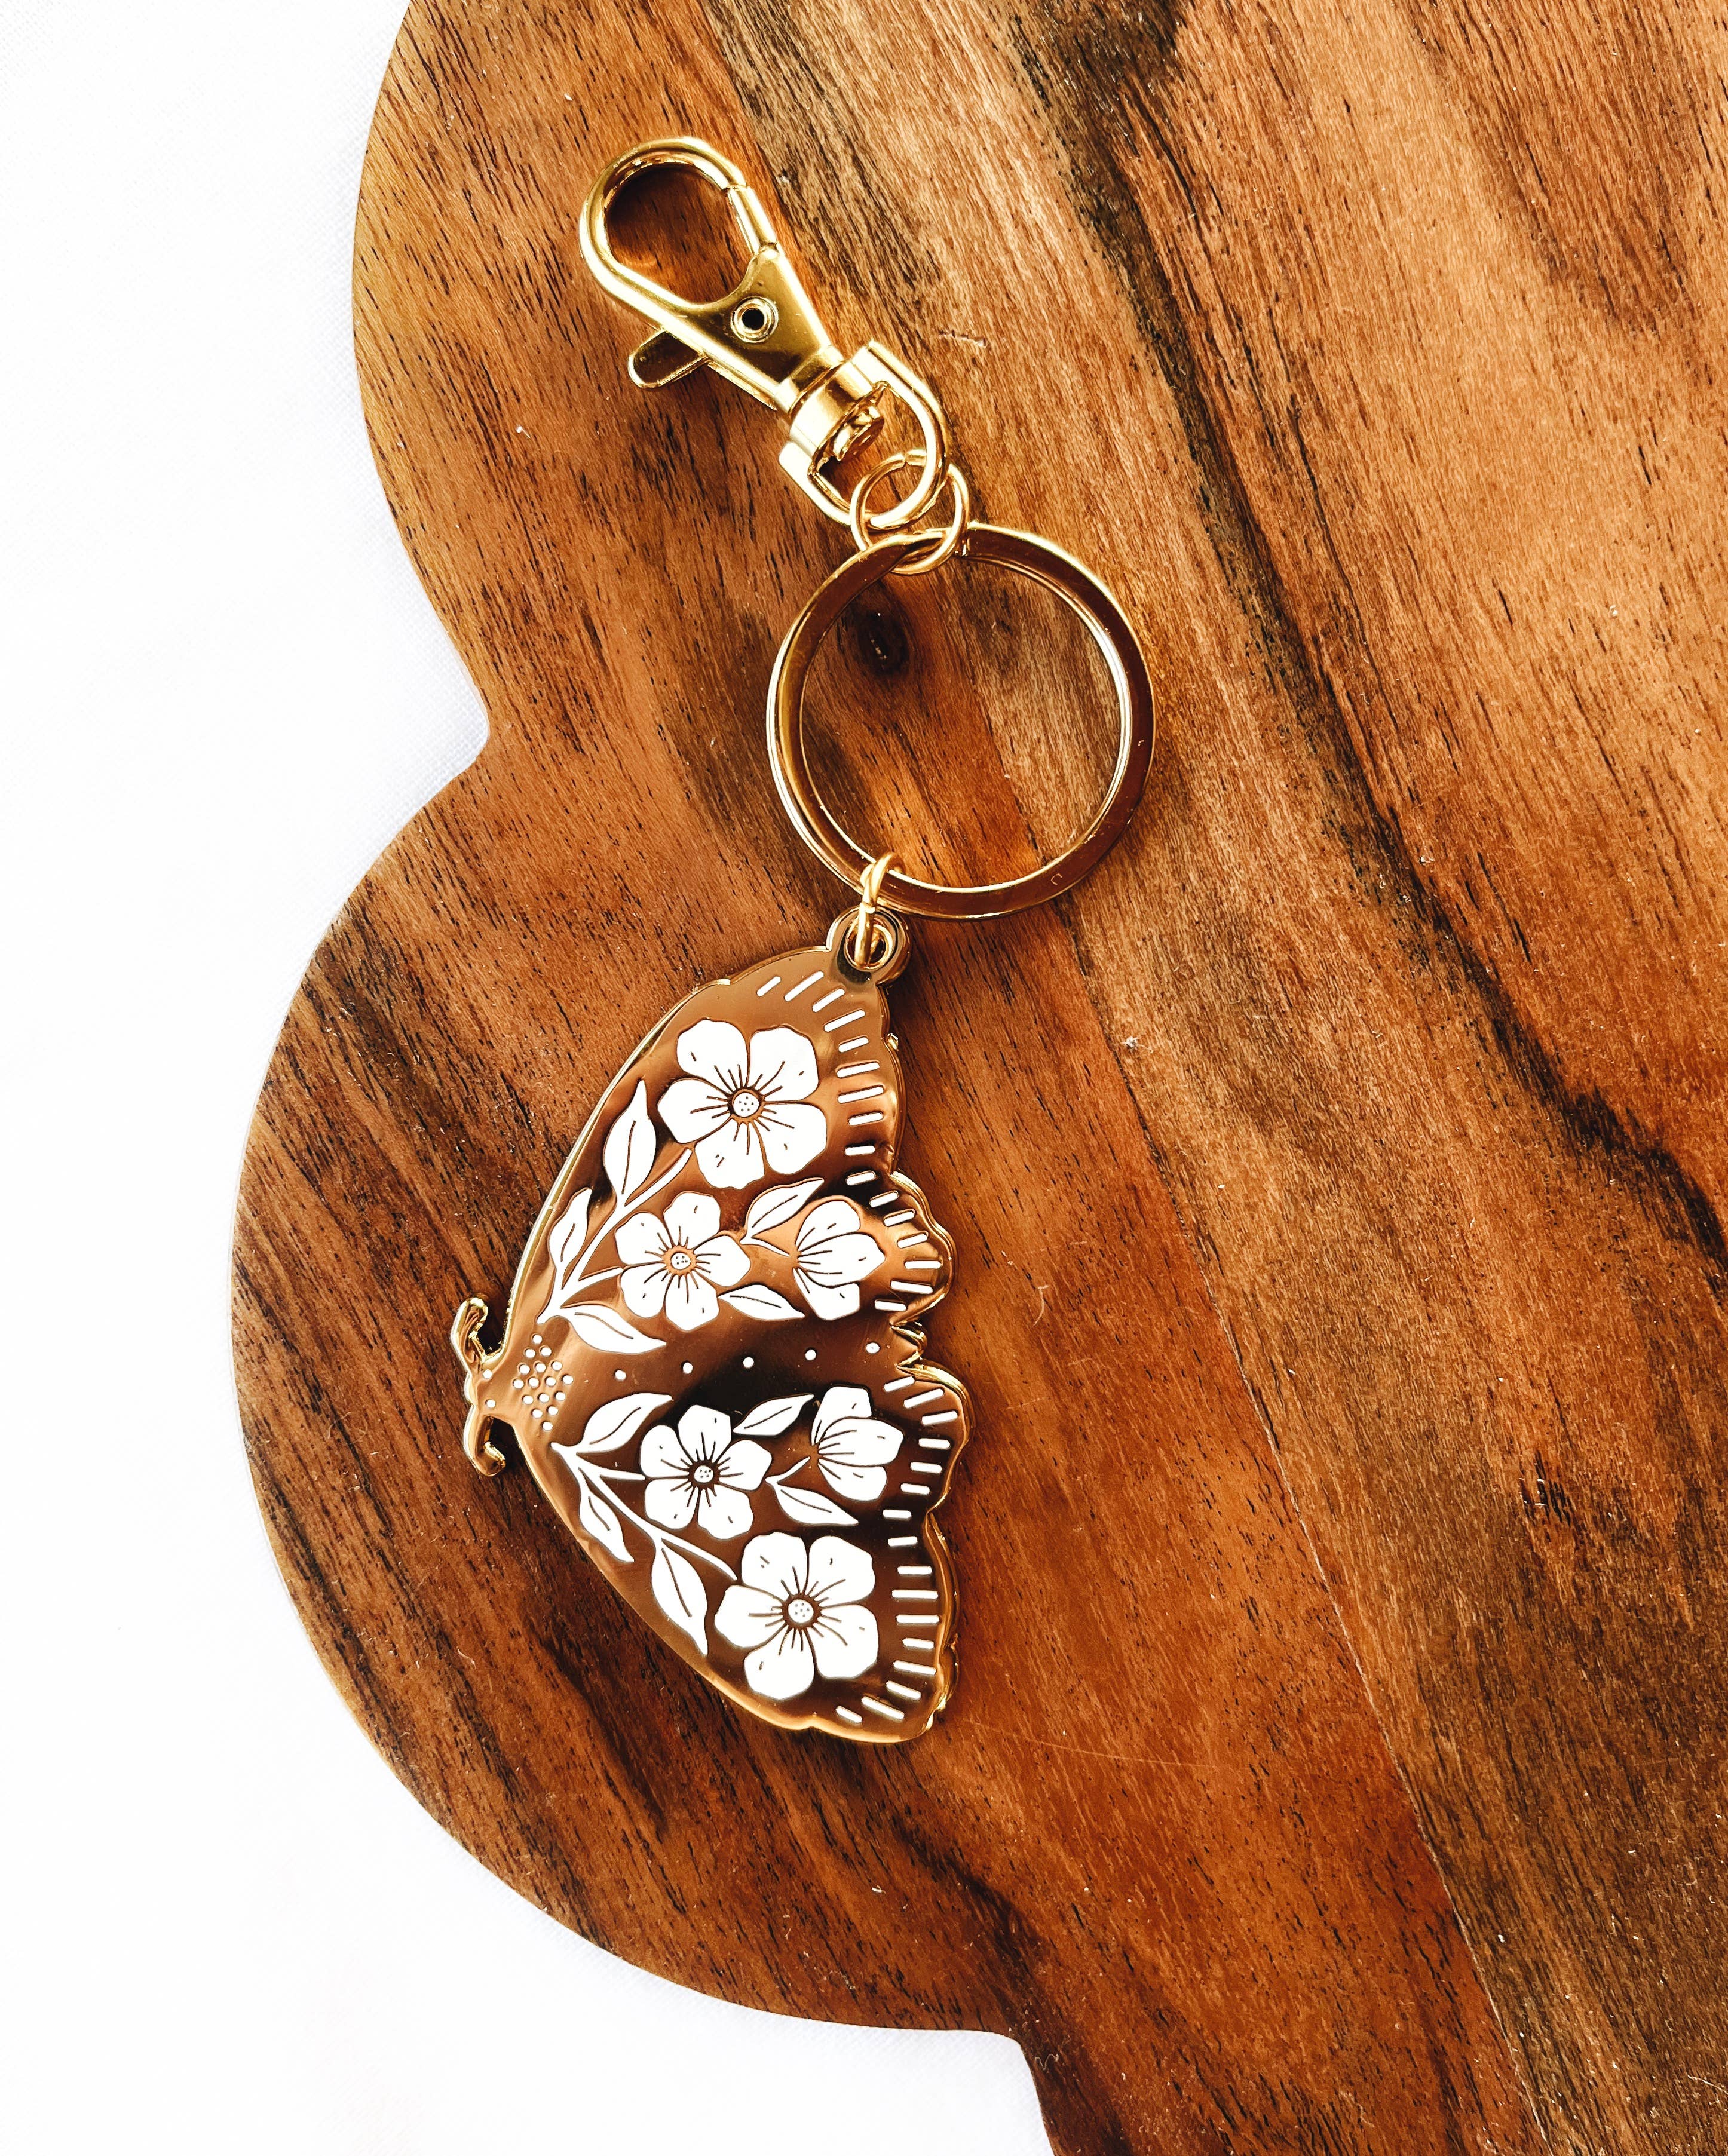 Shop Small Keychain  Elyse Breanne Design – Outer Layer